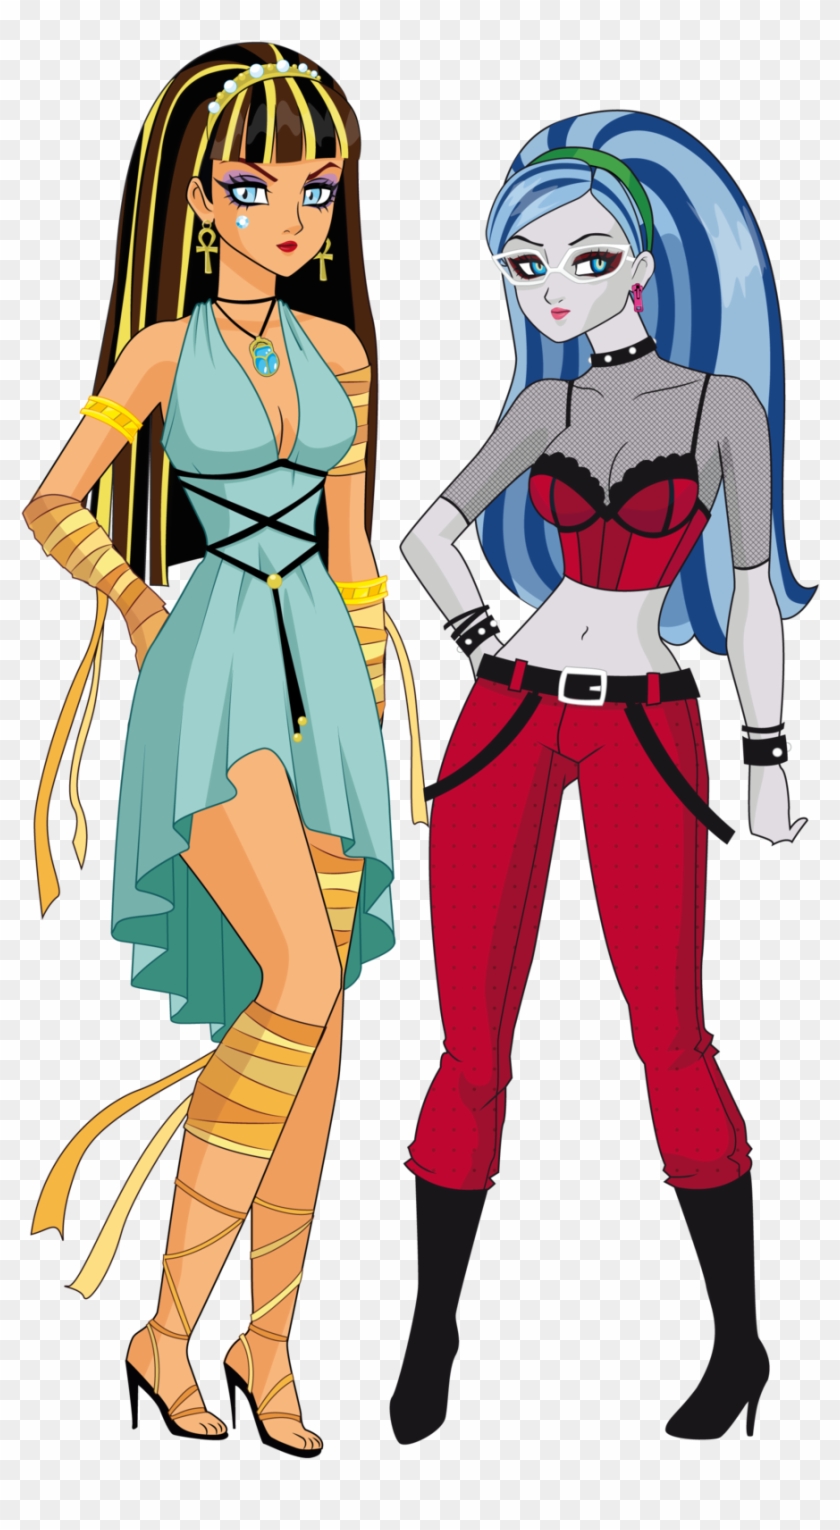 Cleo De Nile Y Ghoulia Yelps Version Anime By Sparks220stars - Cleo De Nile And Ghoulia Yelps #1120805